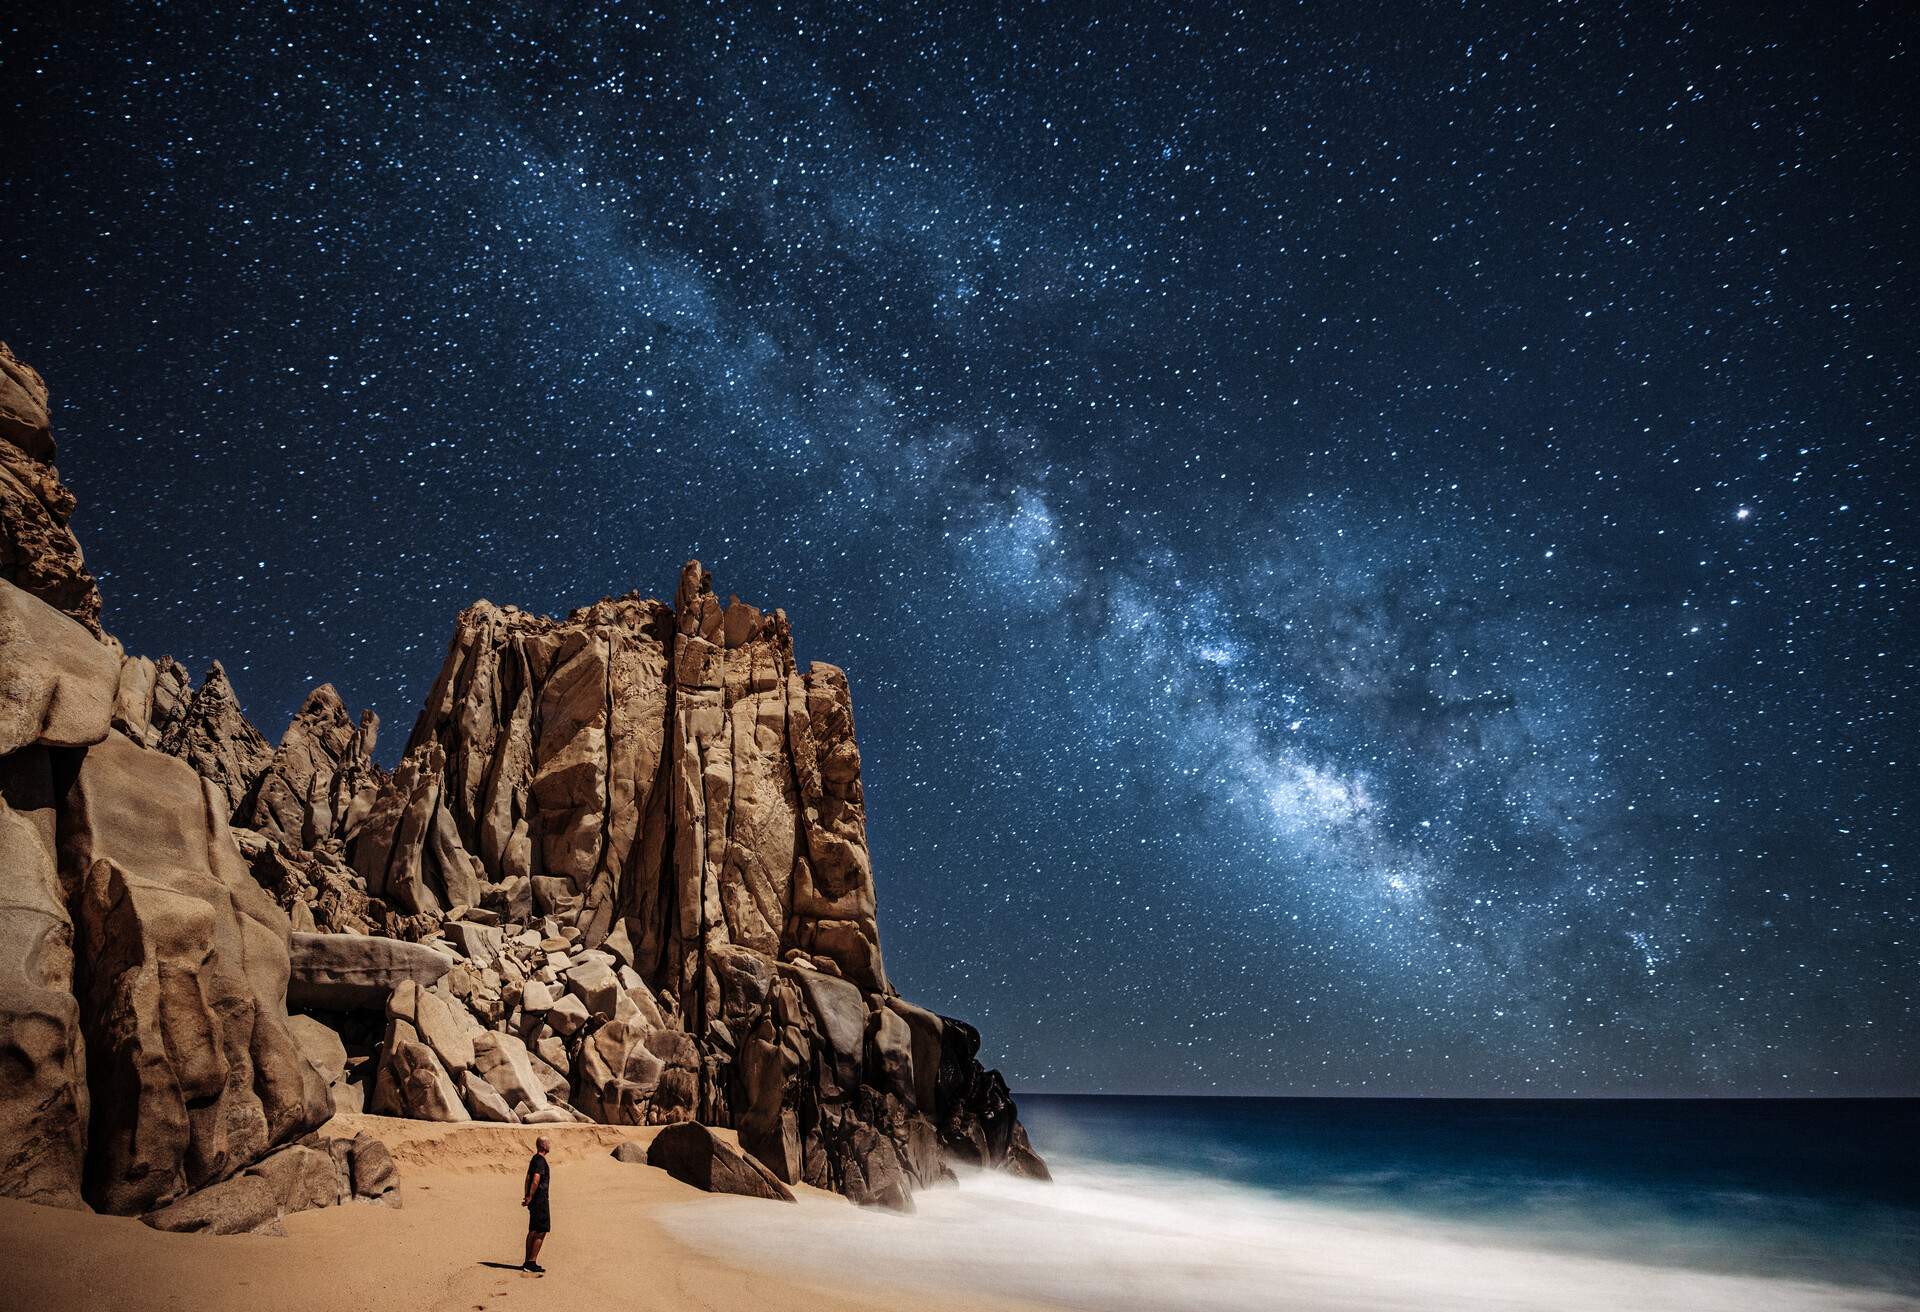 DEST_MEXICO_CABO-SAN-LUCAS_STARGAZING_NIGHT_GettyImages-688341240